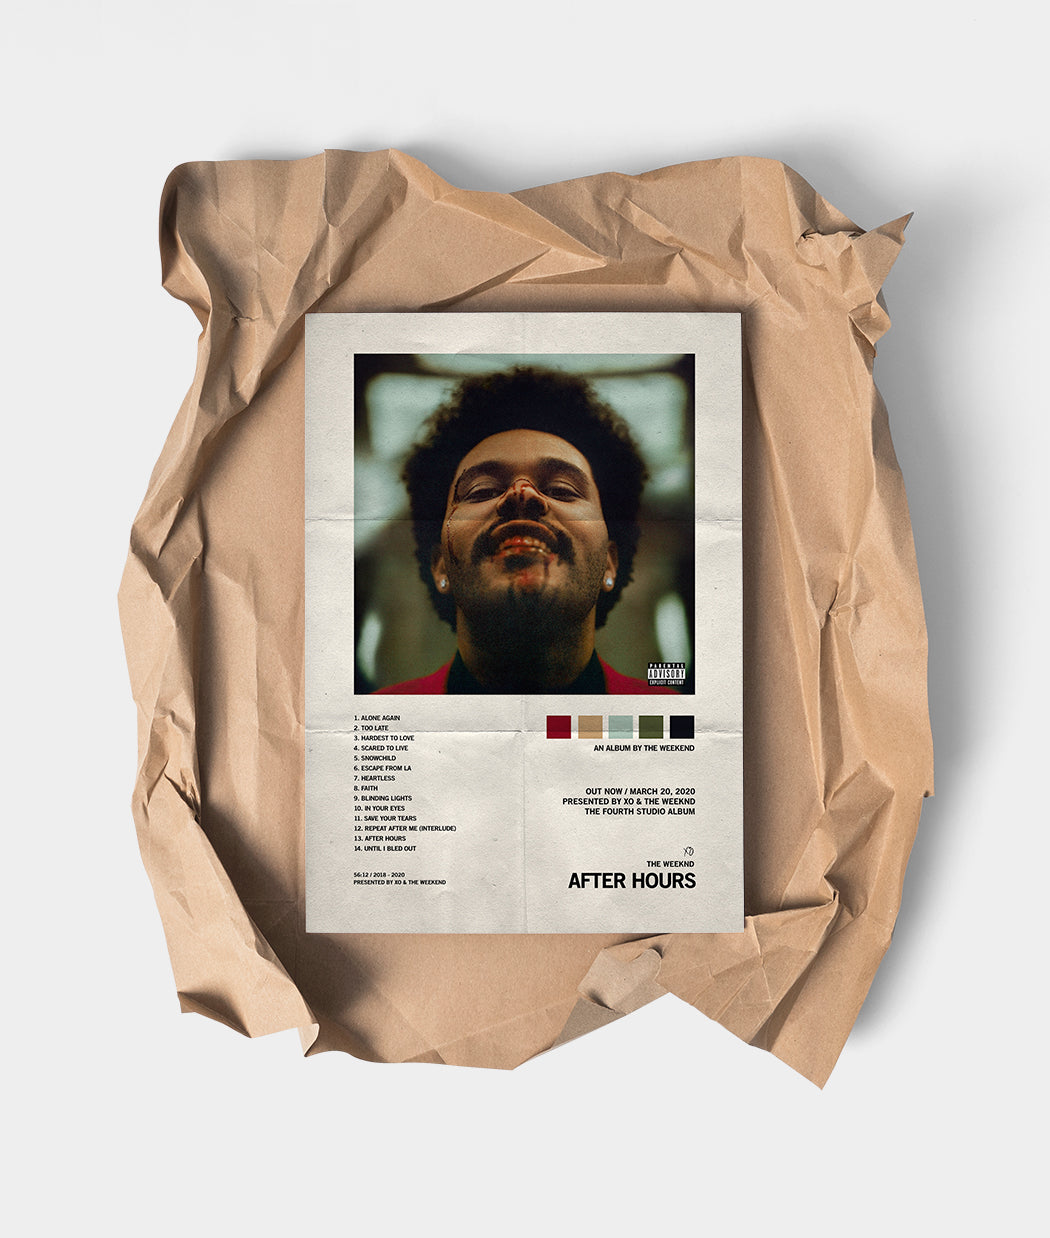 The Weeknd Poster Trilogy Album Cover Poster for Cote dIvoire